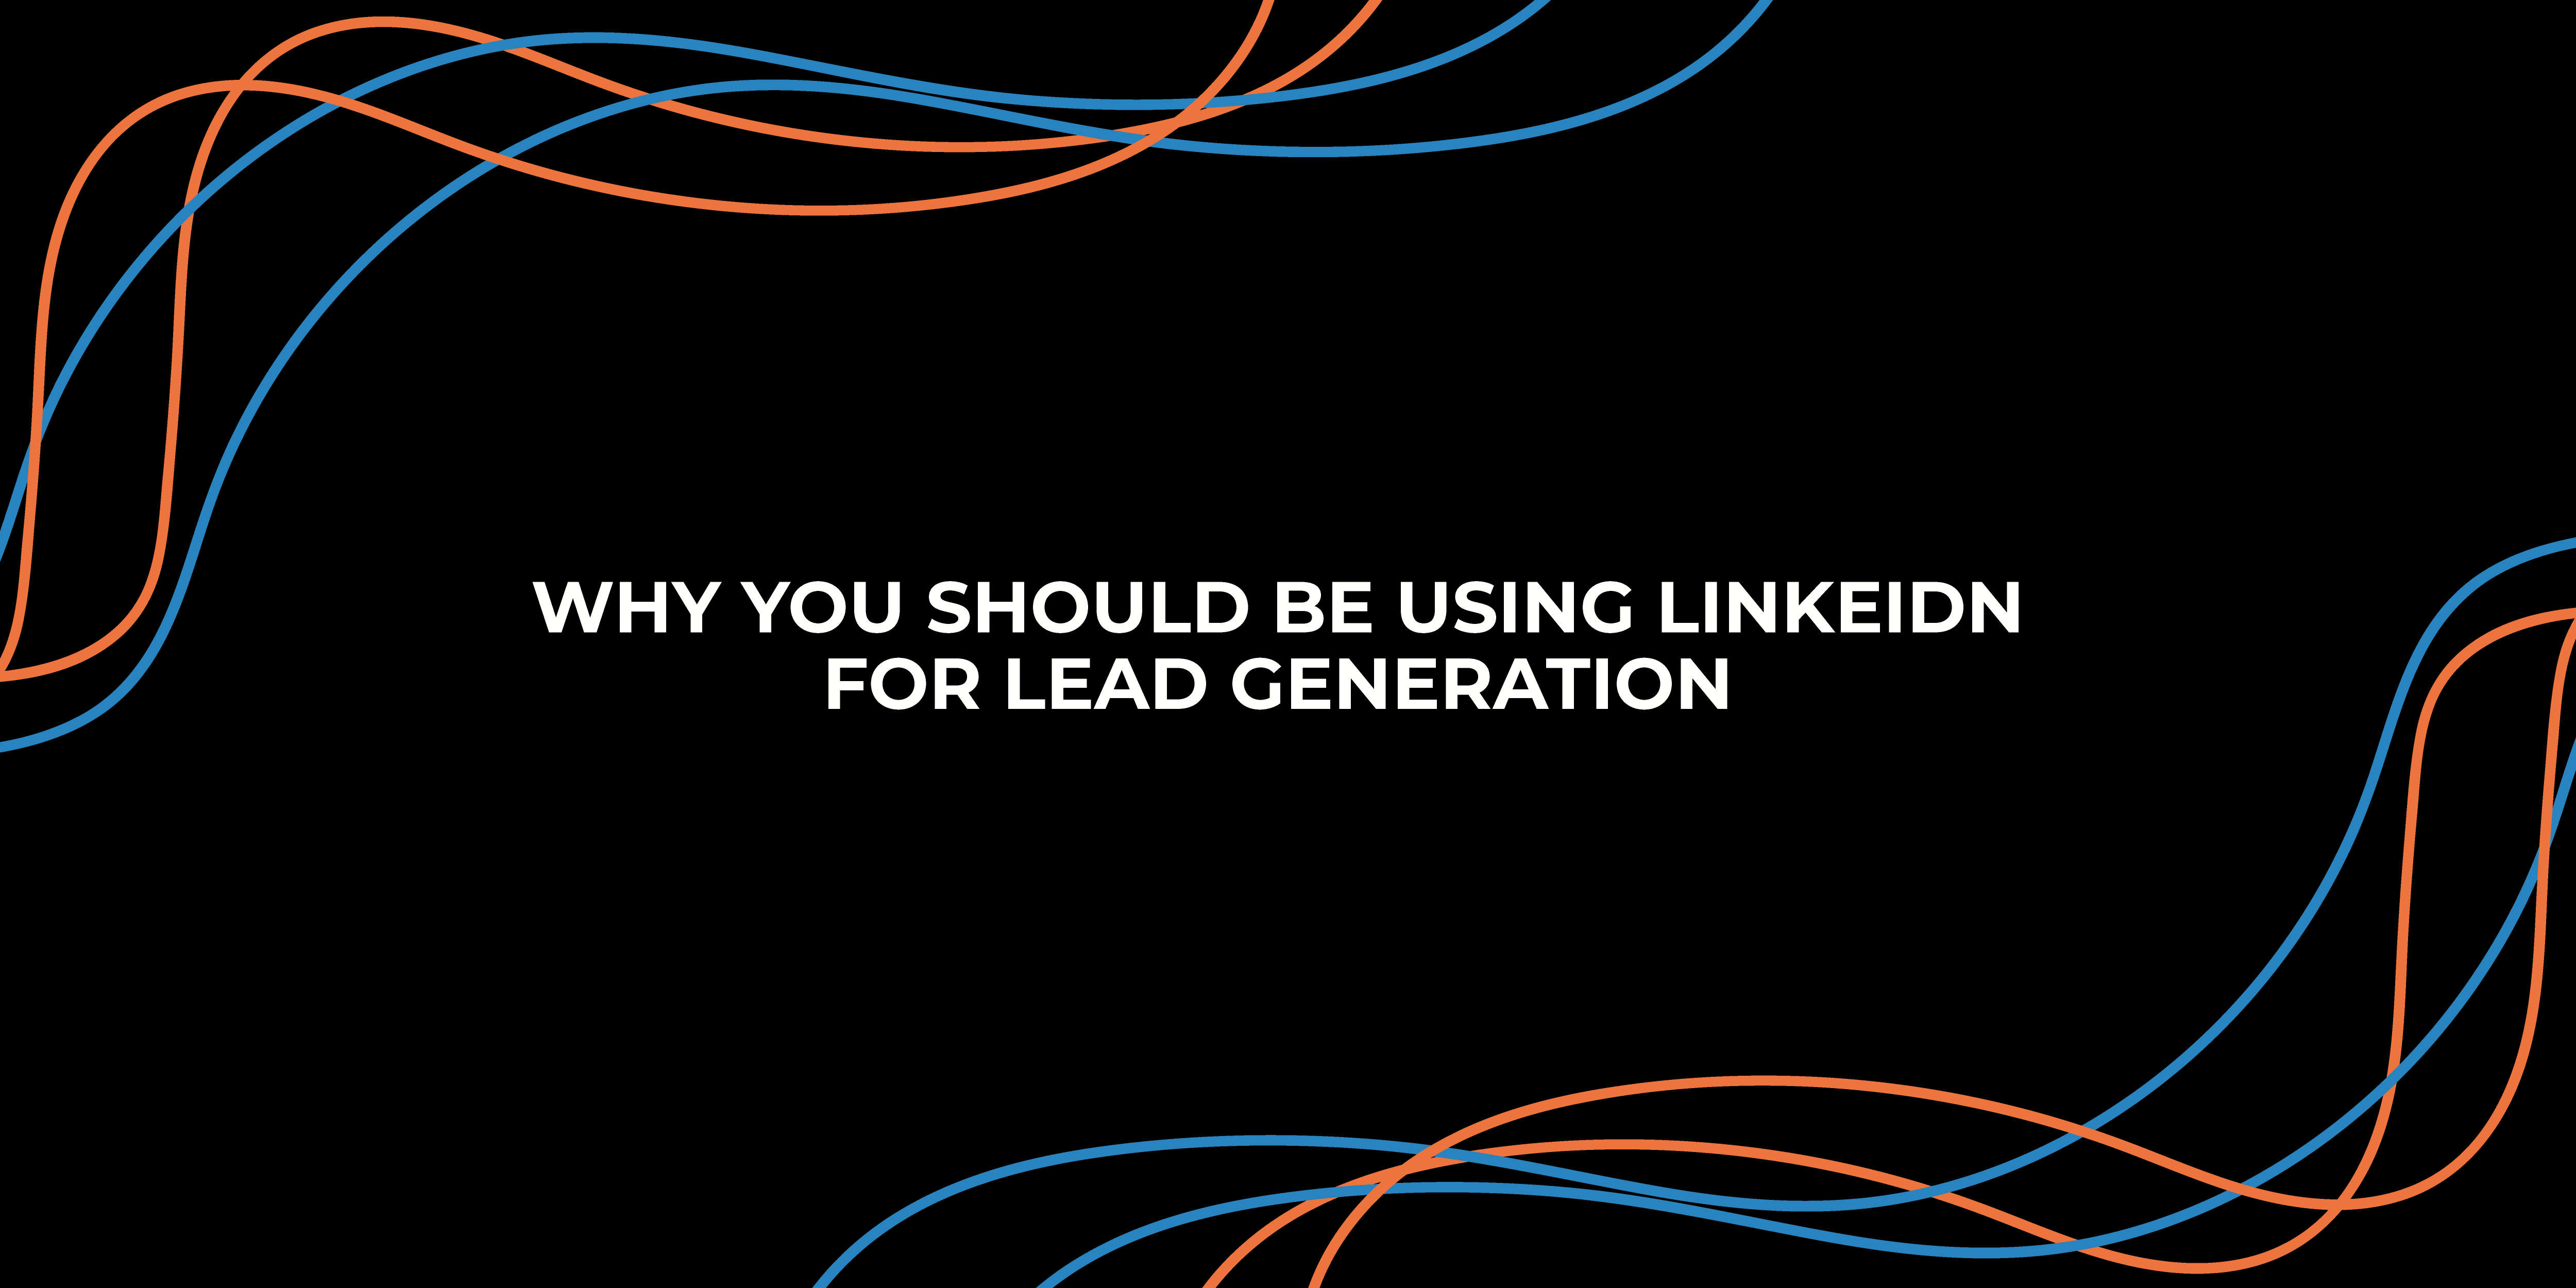 Why you should be using LinkedIn for Lead Generation